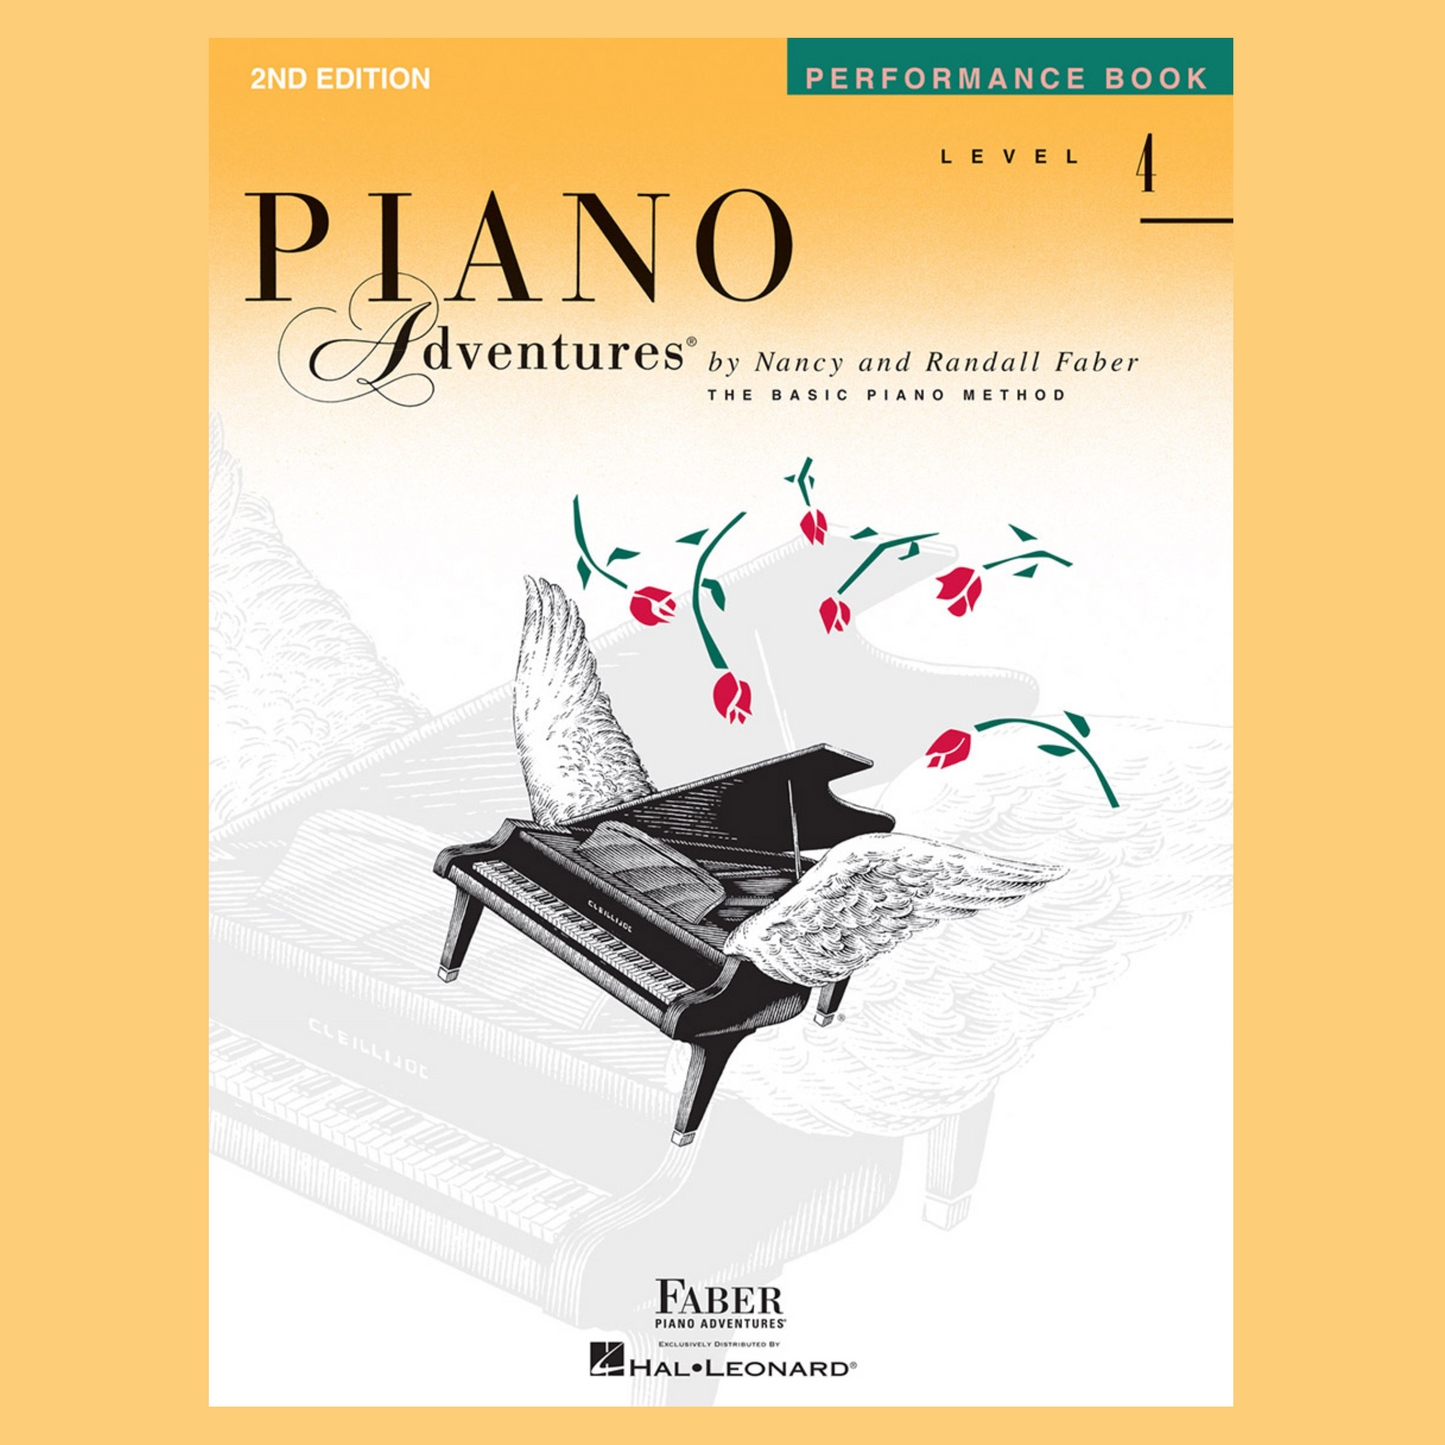 Piano Adventures: Performance Level 4 Book & Keyboard